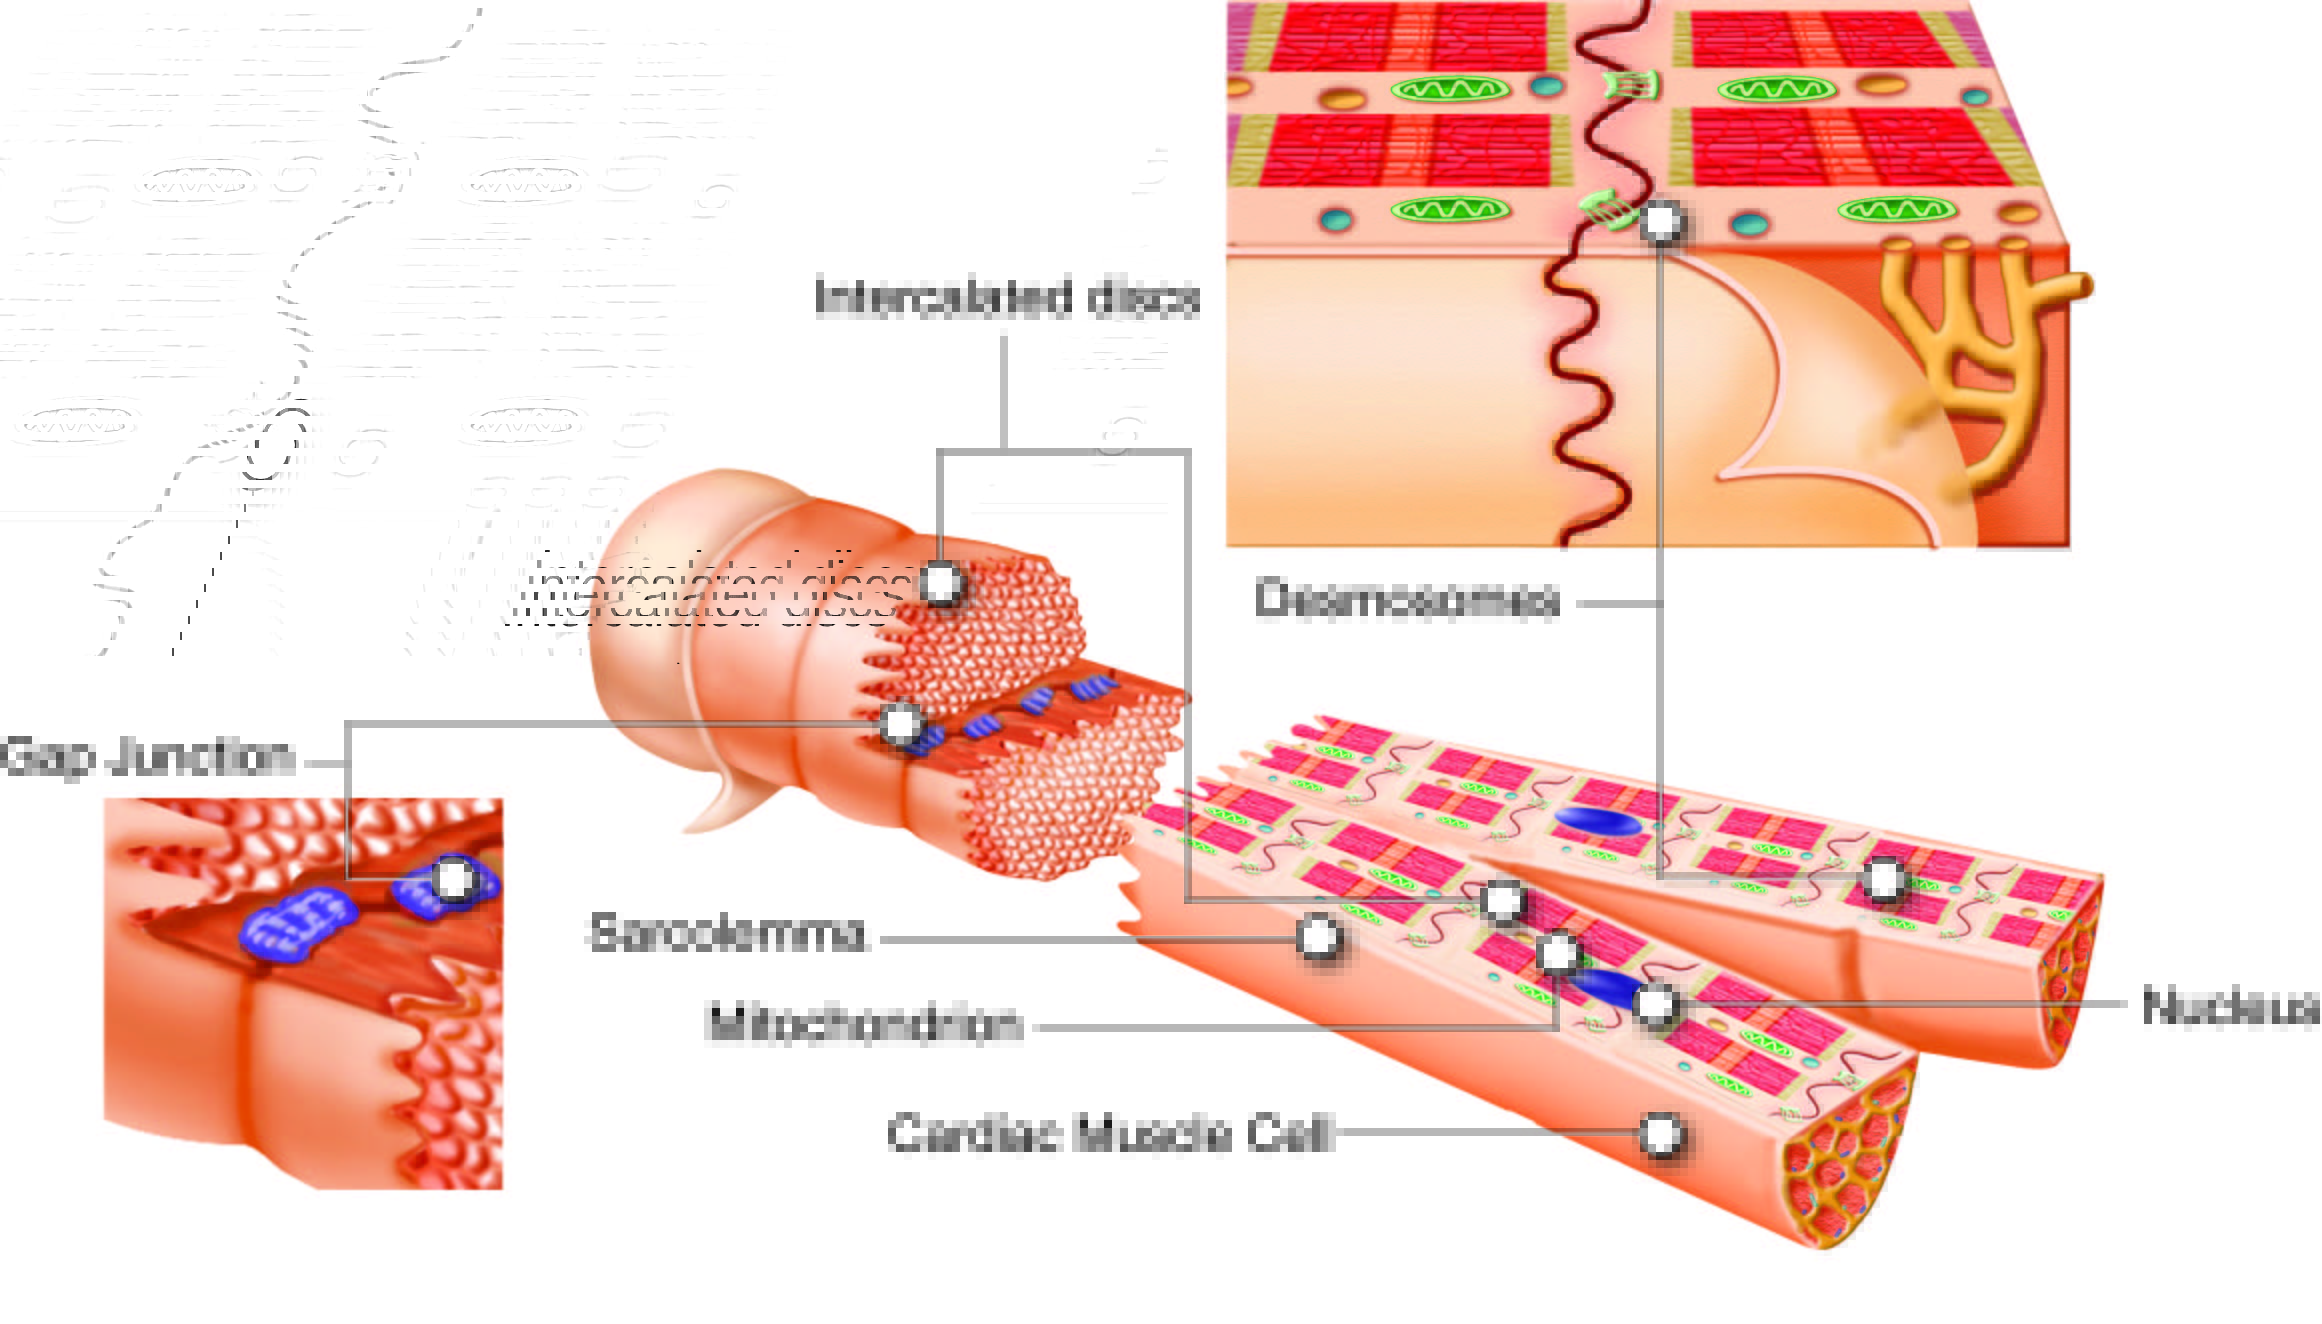 cardiac muscle cells and fibers